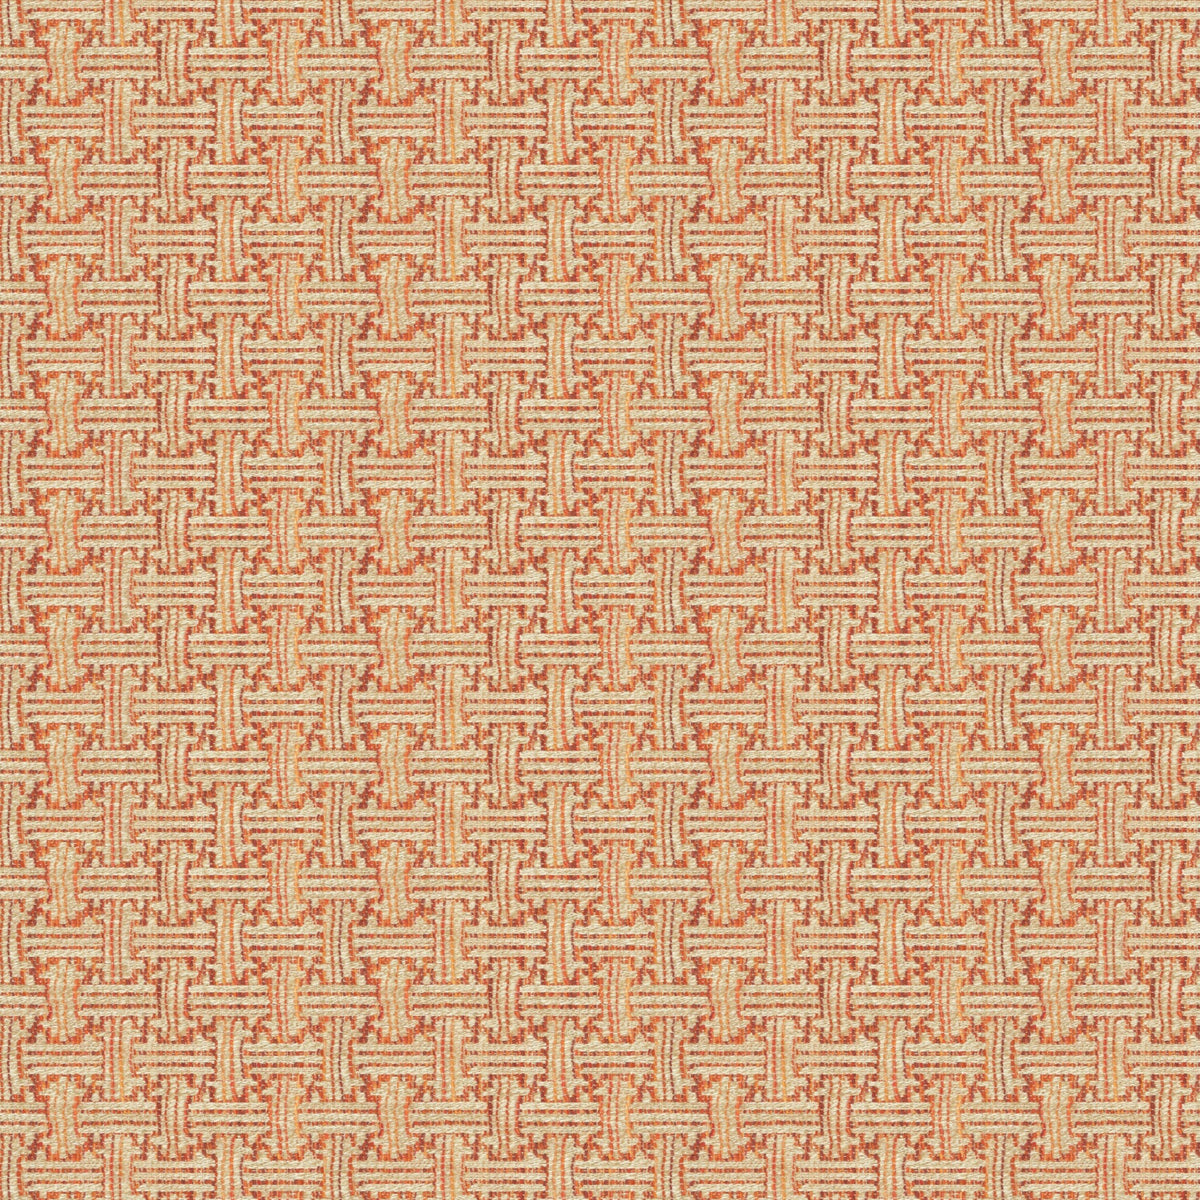 | | - Upholstery Fabric Weave Fireglow | Exford Linwood